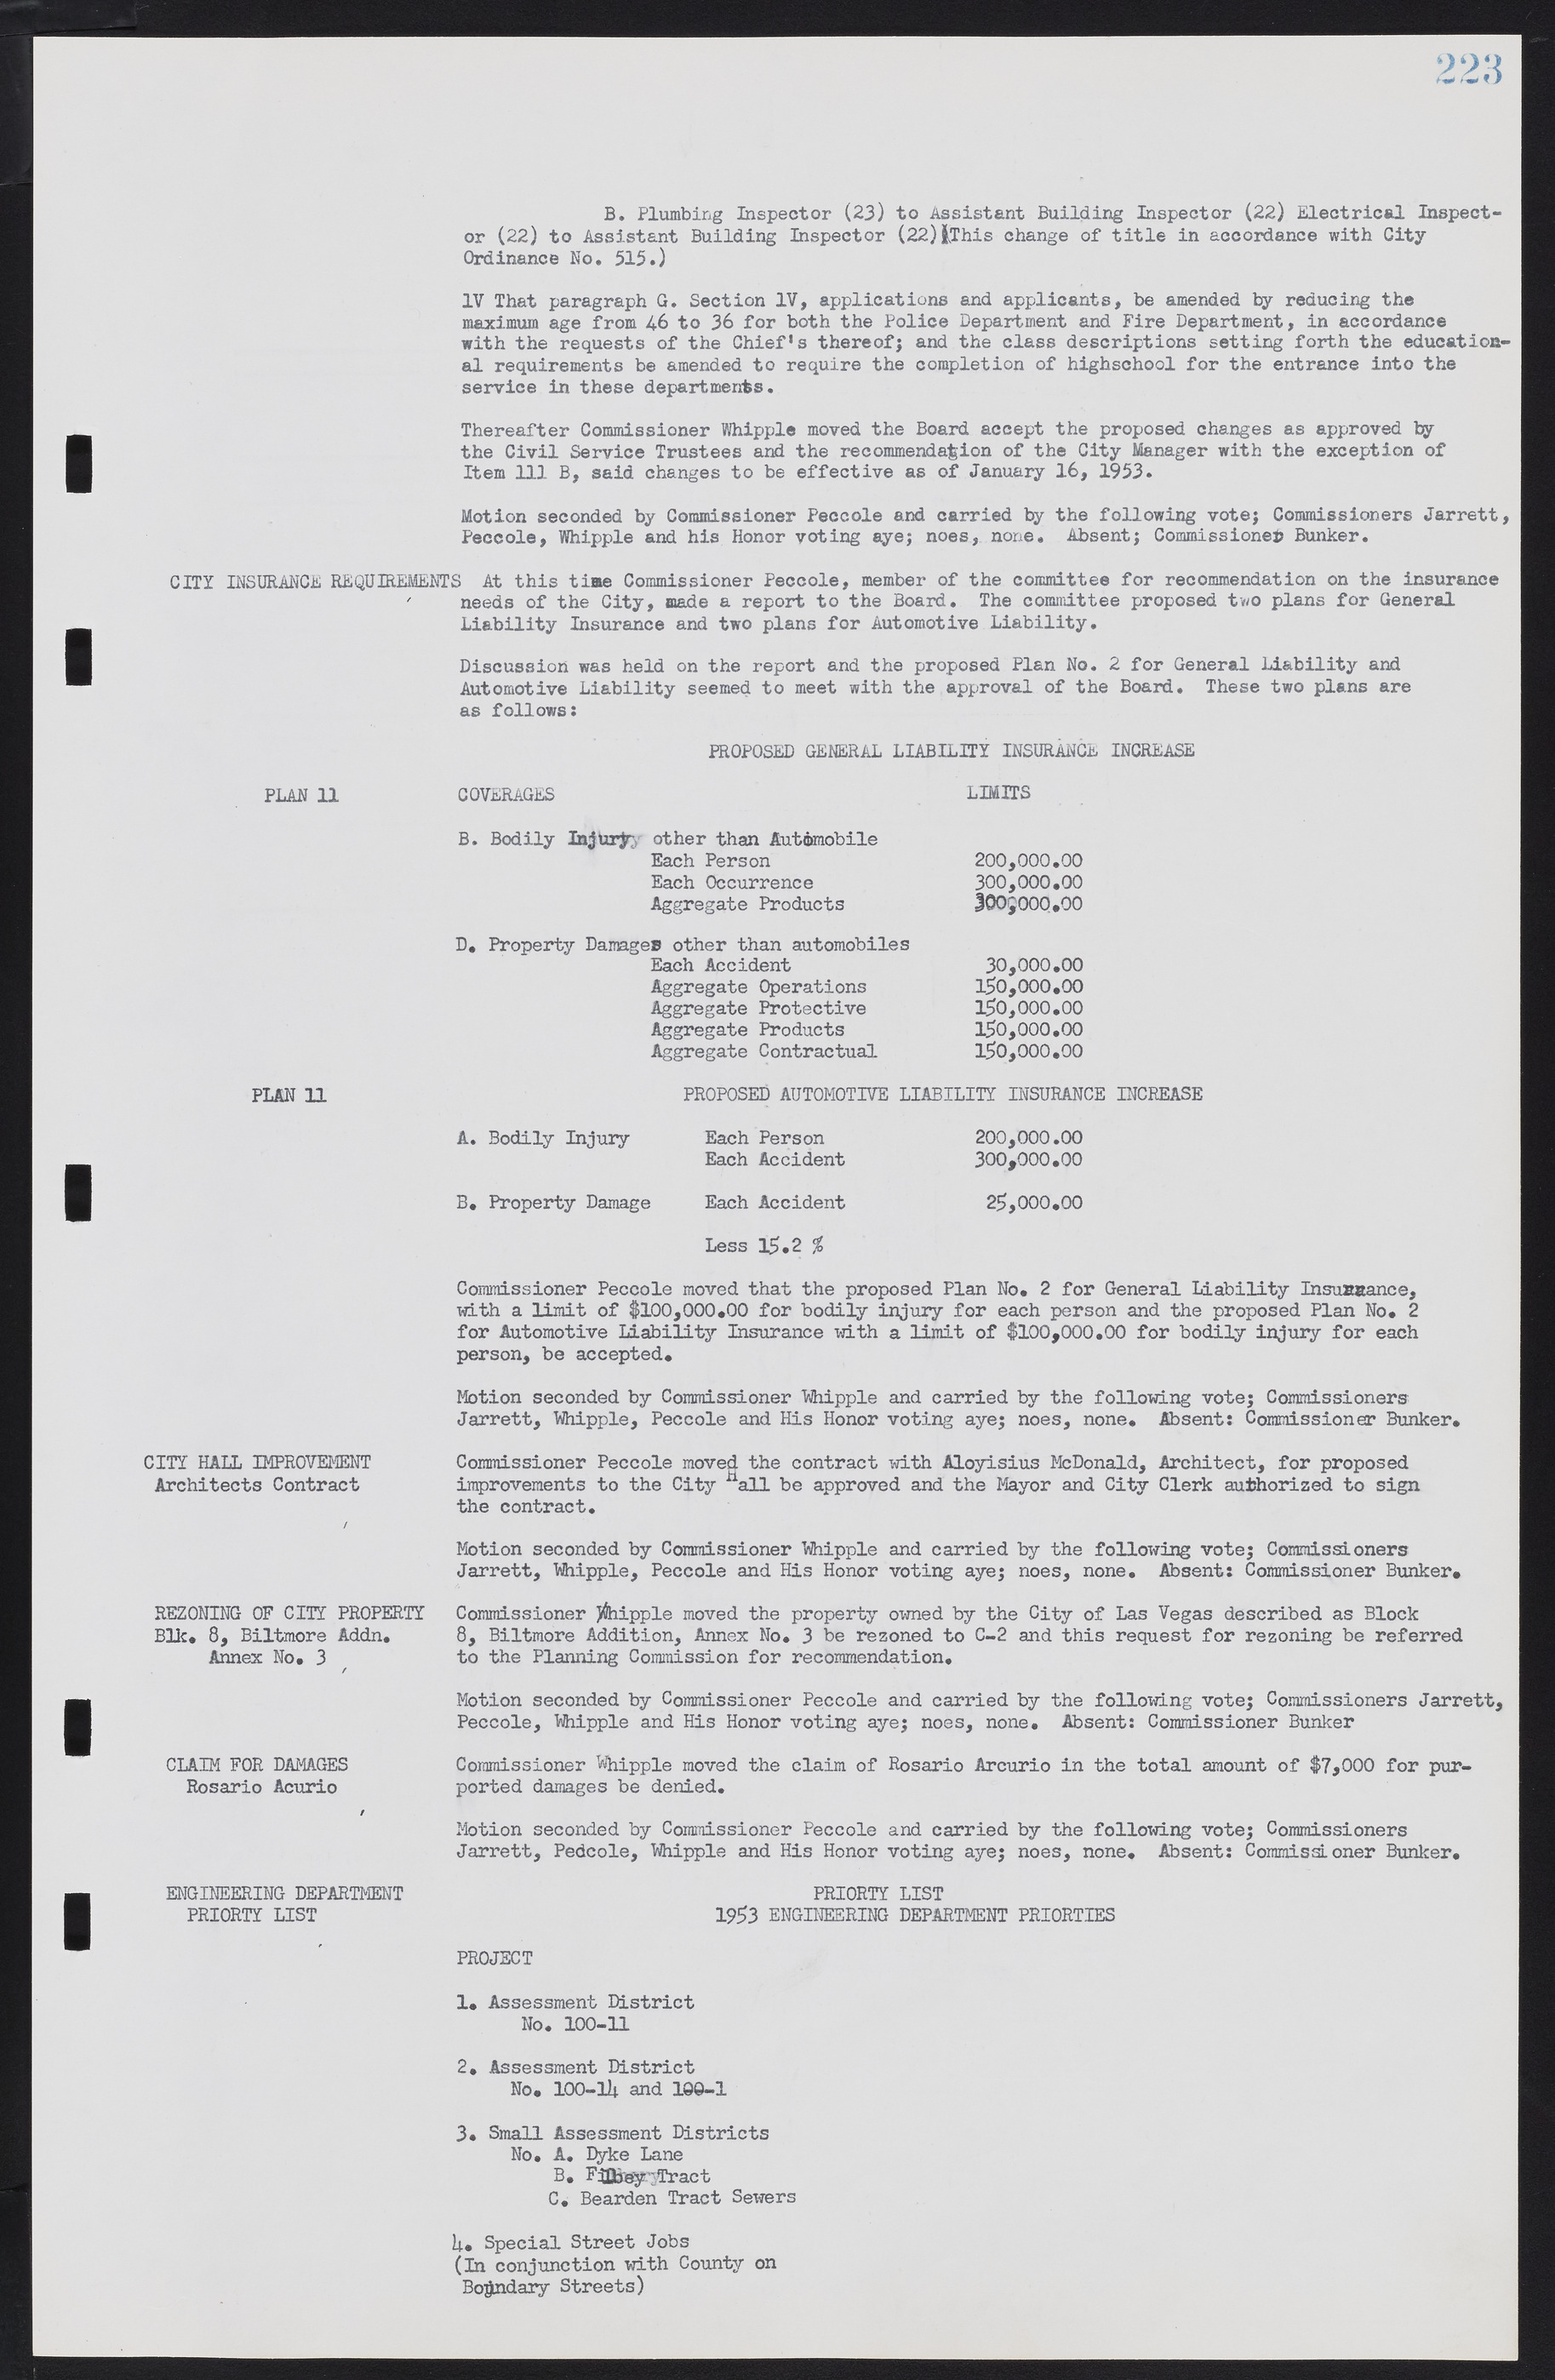 Las Vegas City Commission Minutes, May 26, 1952 to February 17, 1954, lvc000008-239